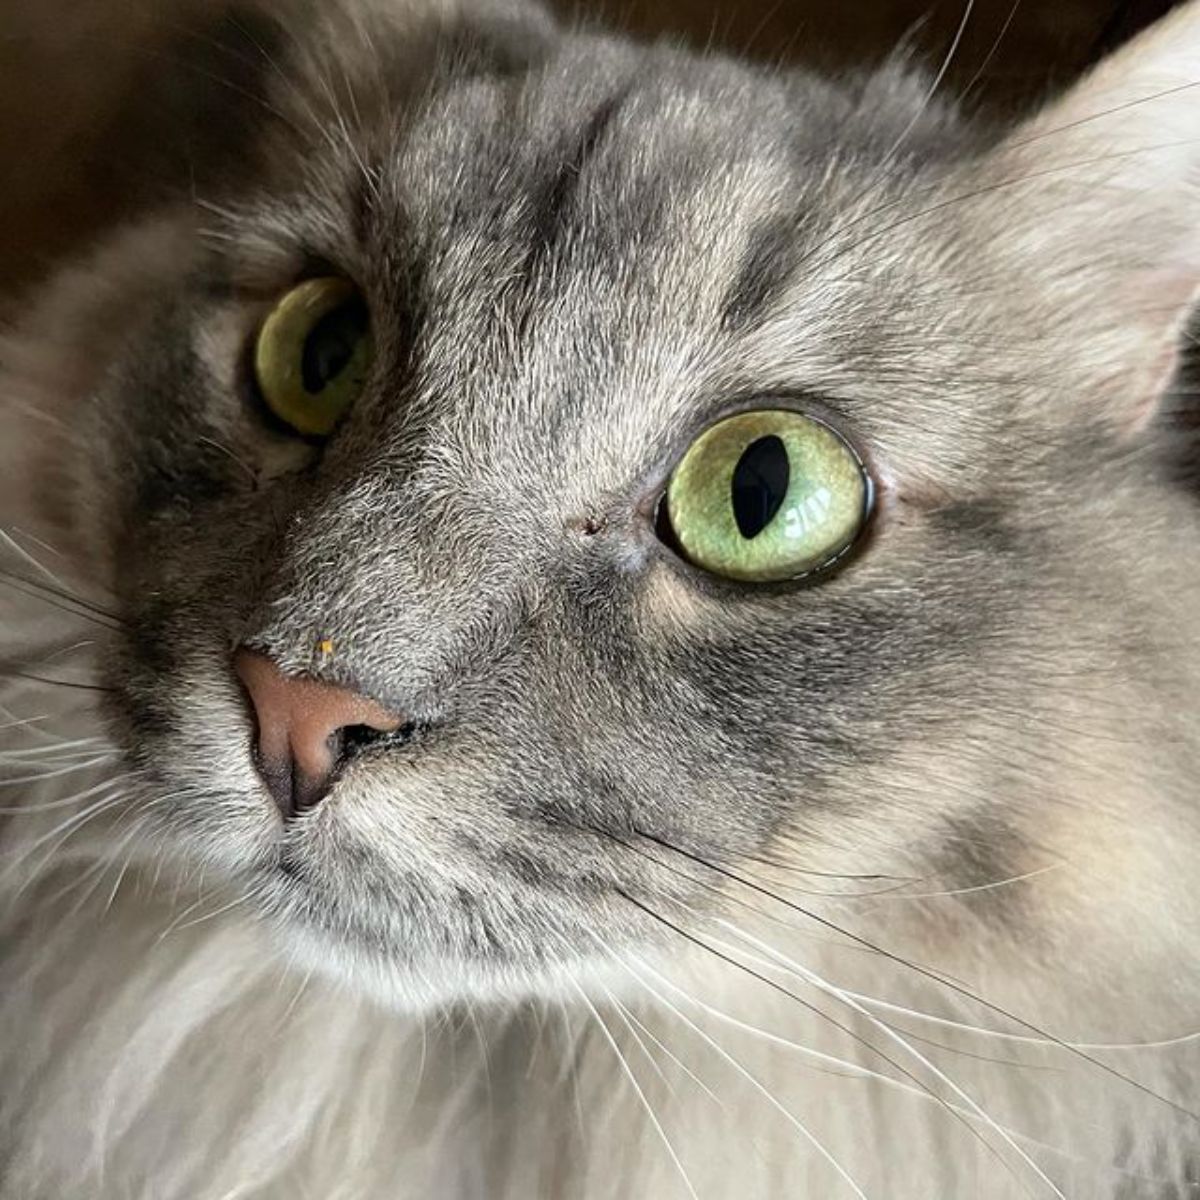 A close-up of a gray maine coon face.